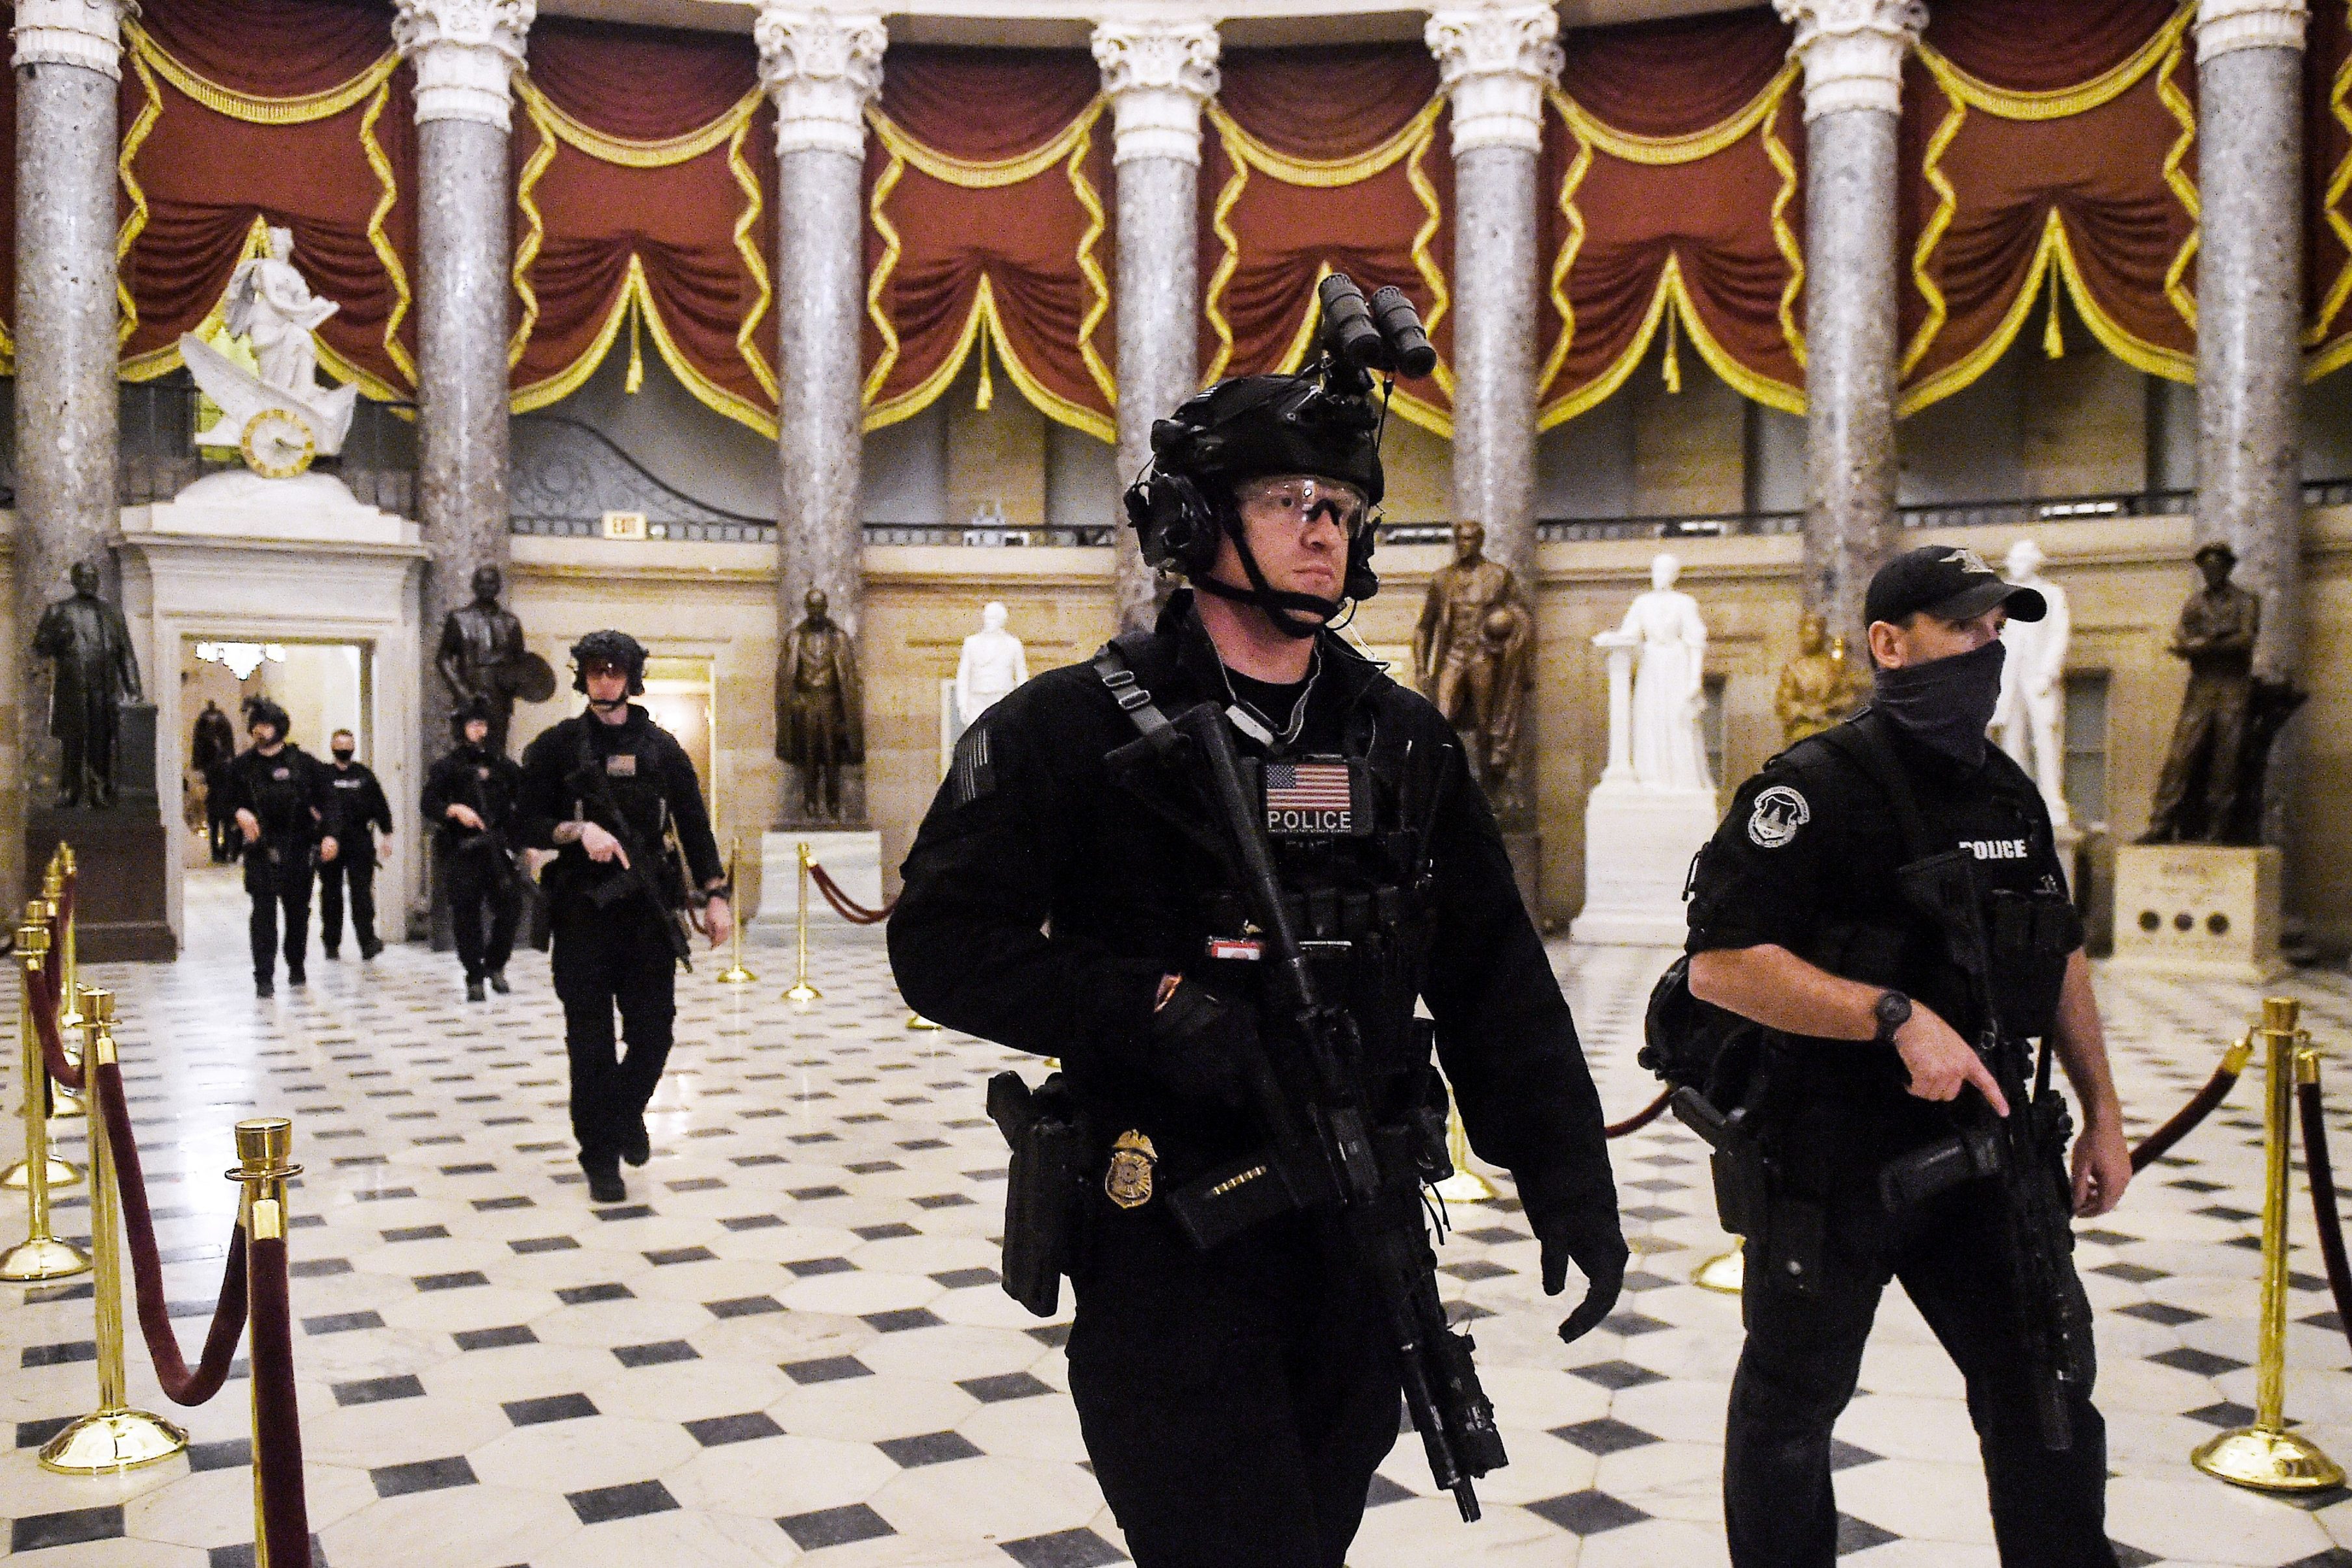 Members of the Swat team patrol and secure the Statuary Hall